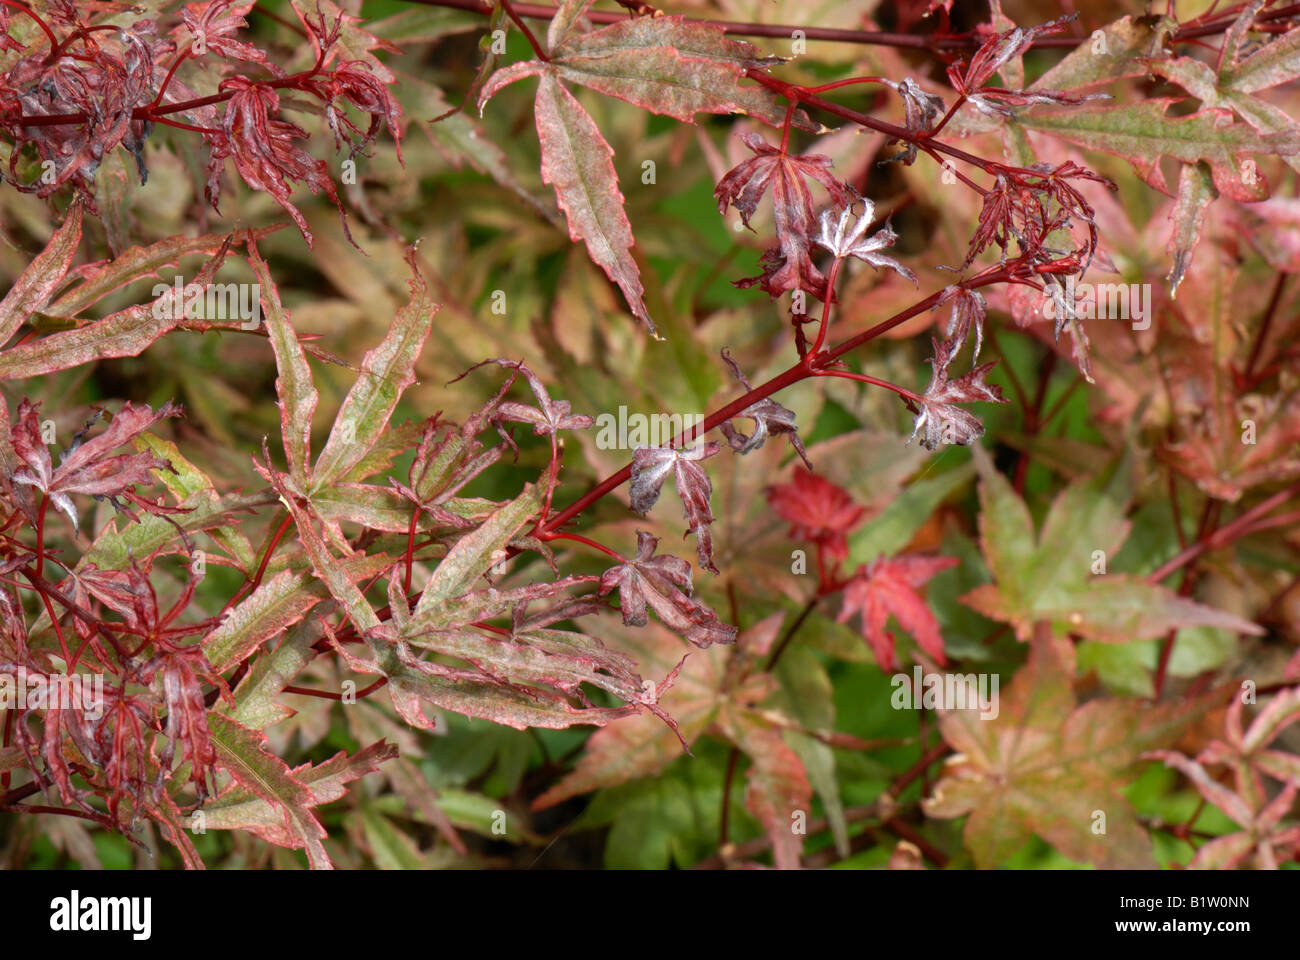 Powdery mildew on the leaves of a small red leaved Japanese maple Stock Photo